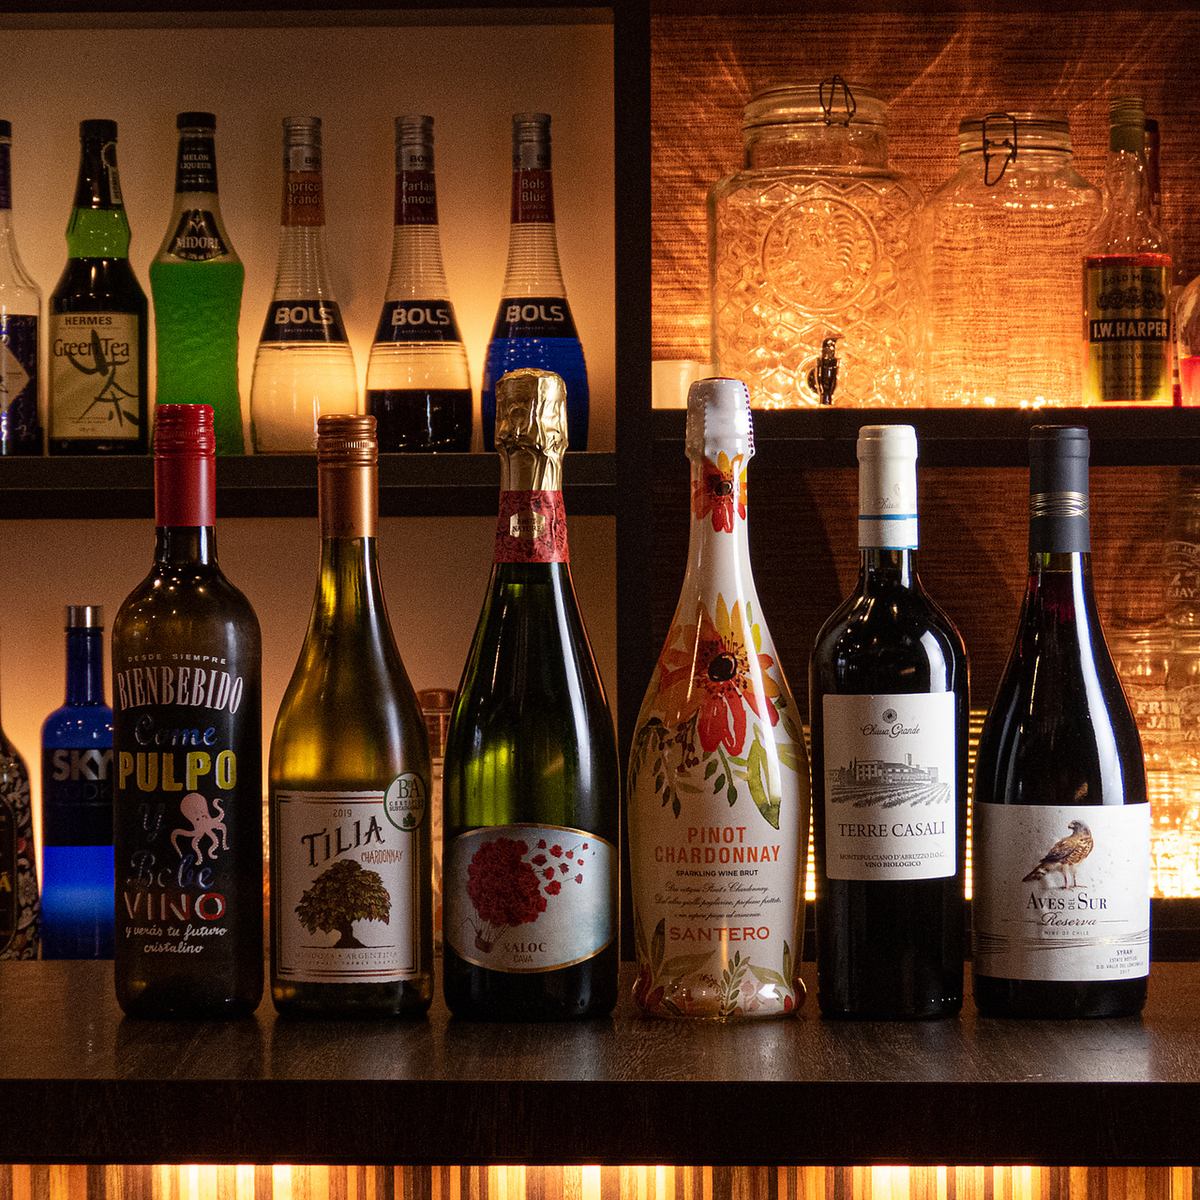 A wide variety of red and white wines that go well with food ◎Sparkling and rosé are also available♪